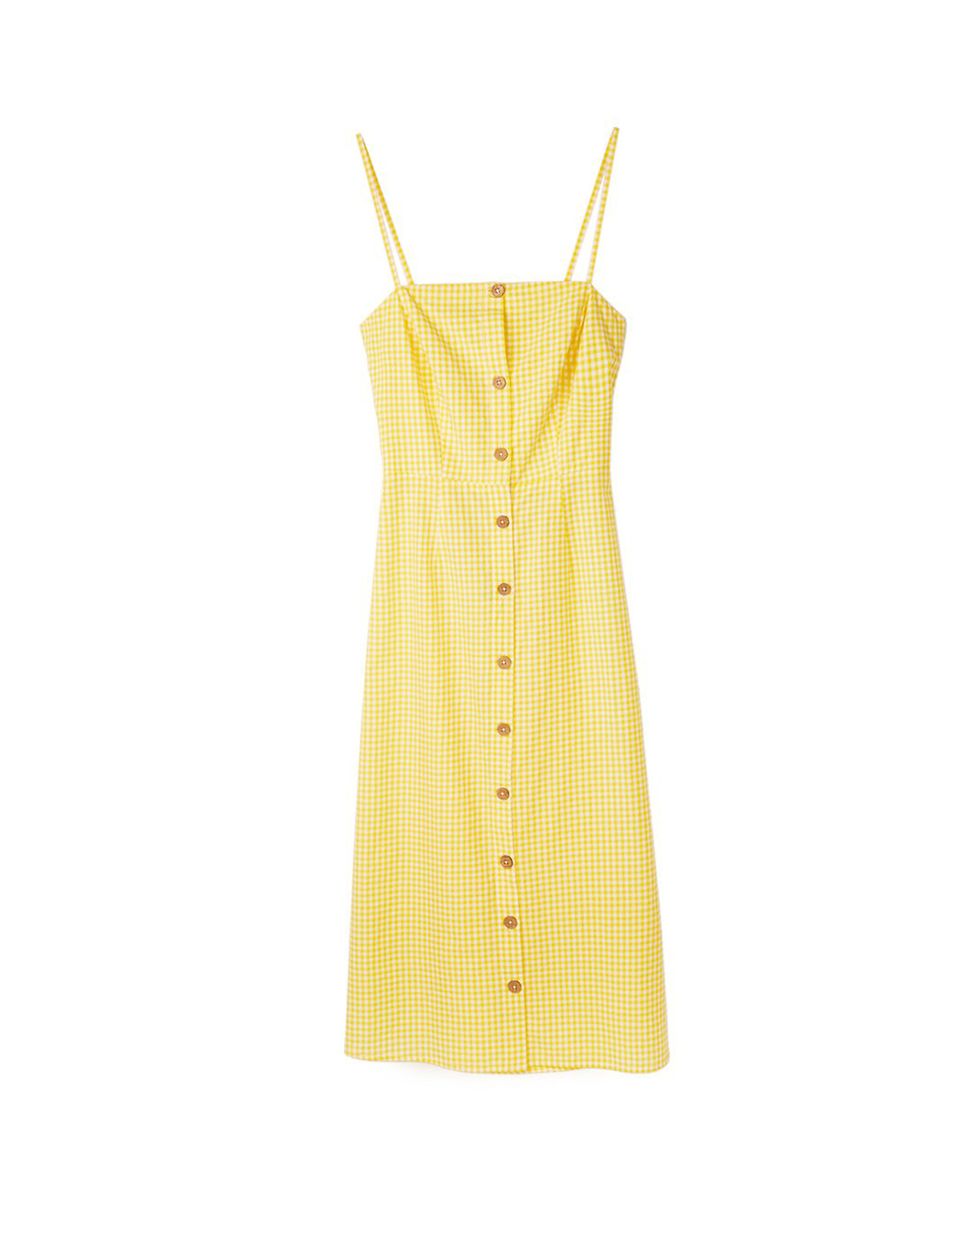 Clothing, Yellow, Day dress, Dress, camisoles, Pattern, Polka dot, Cocktail dress, Beige, One-piece garment, 